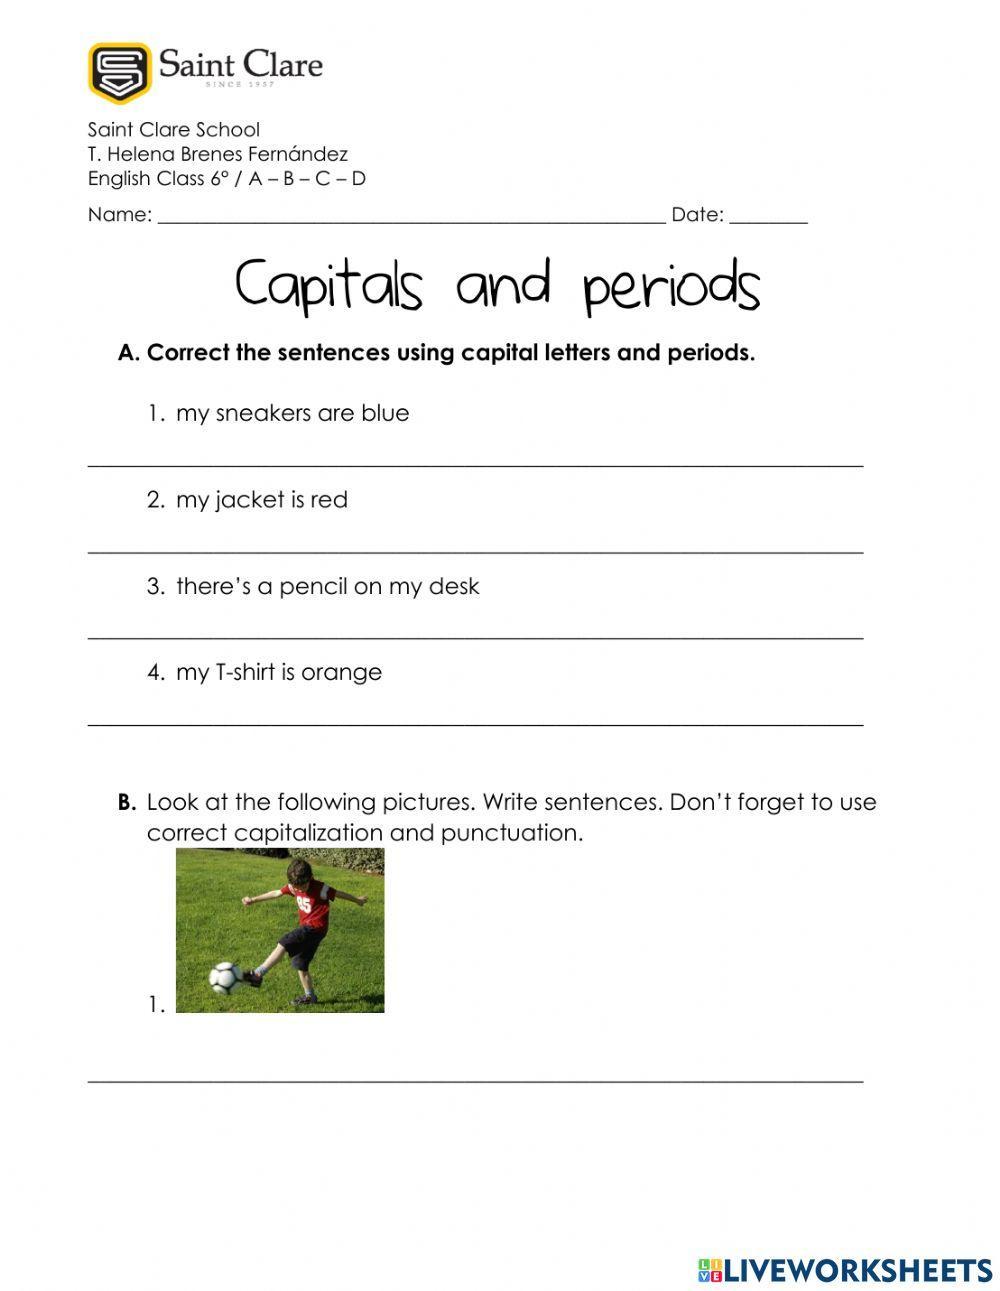 Capitals and periods